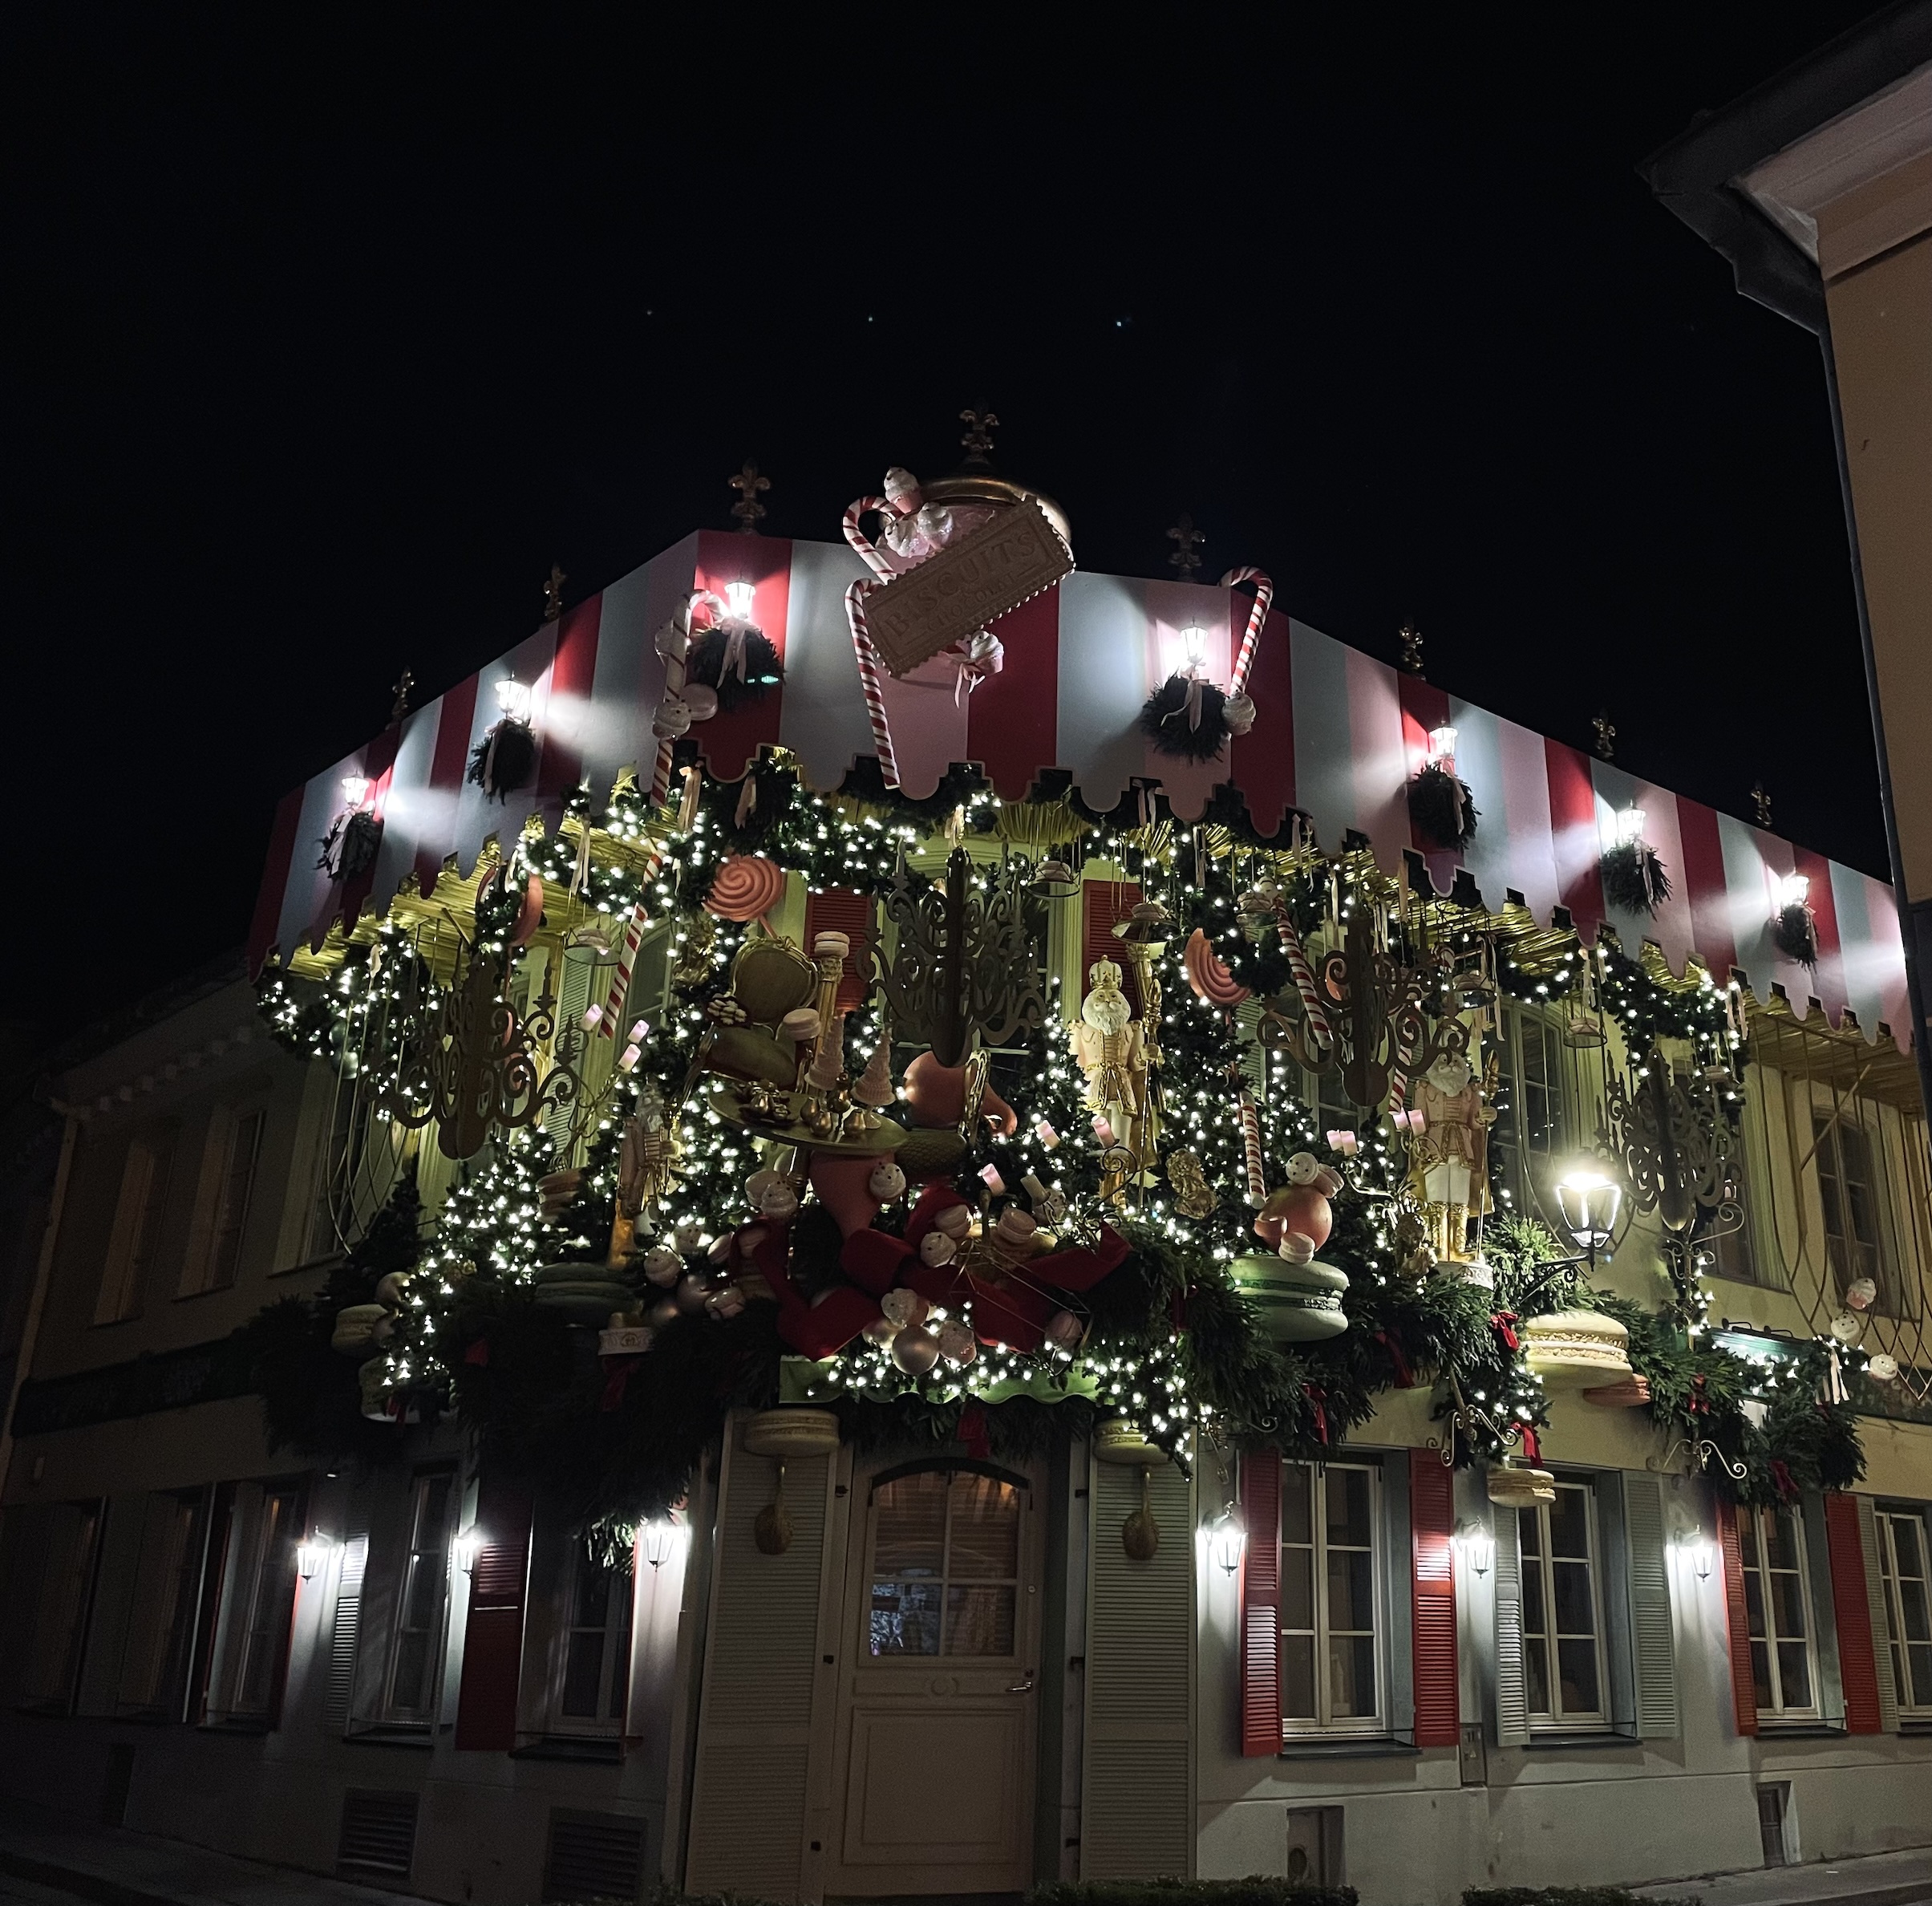 A restaurant in Vilnius decorated for the season